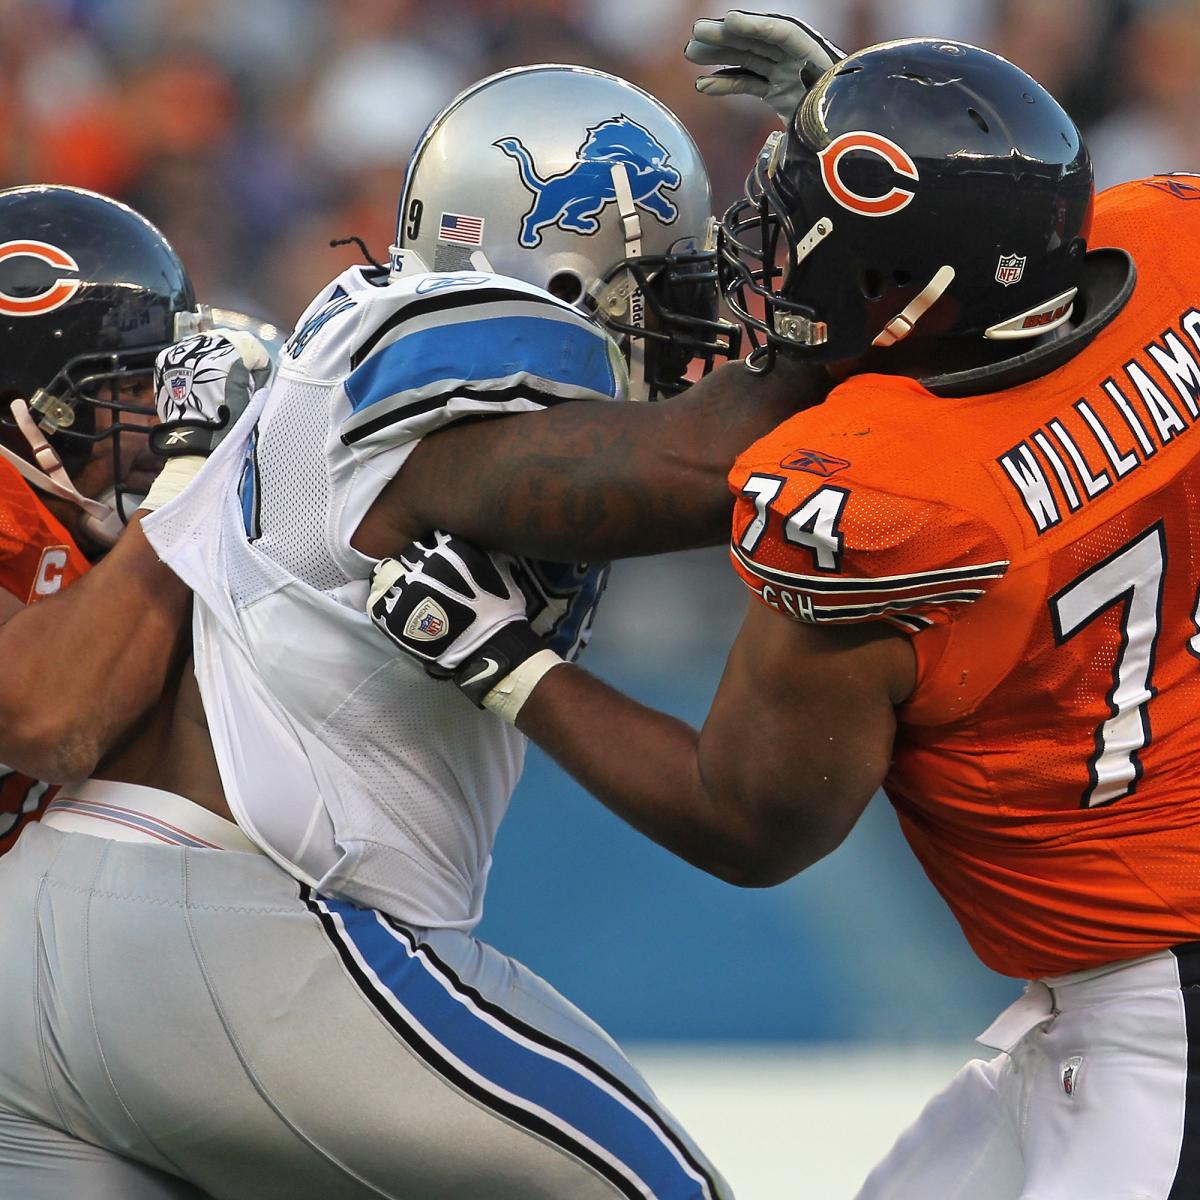 Detroit Lions vs. Chicago Bears Live Score, Highlights and Analysis